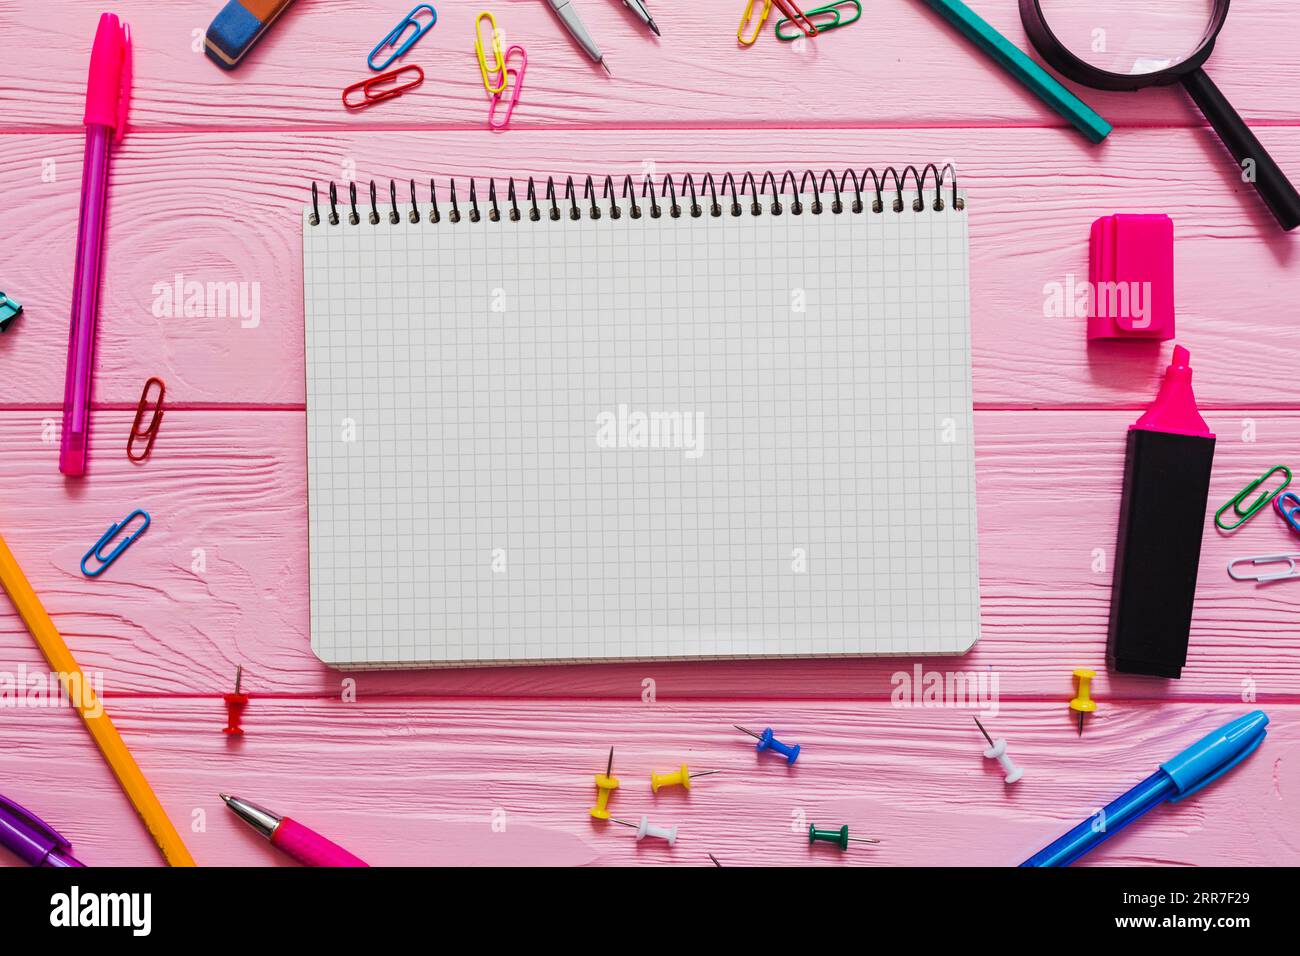 Childish notebook with colors Stock Photo